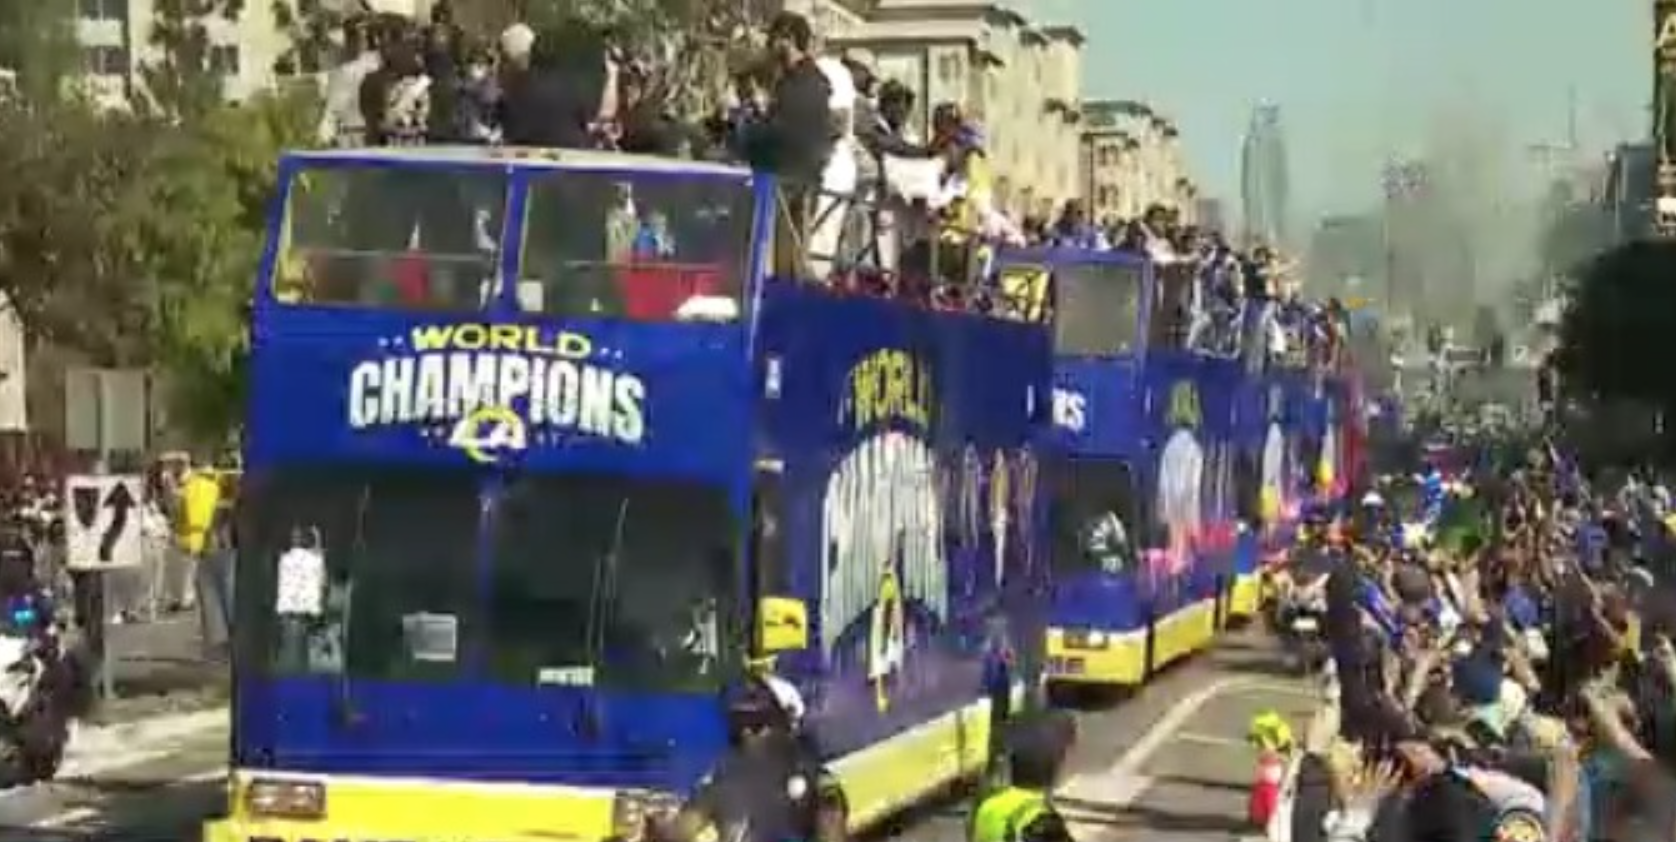 The Rams caravan of champions puts on the big party